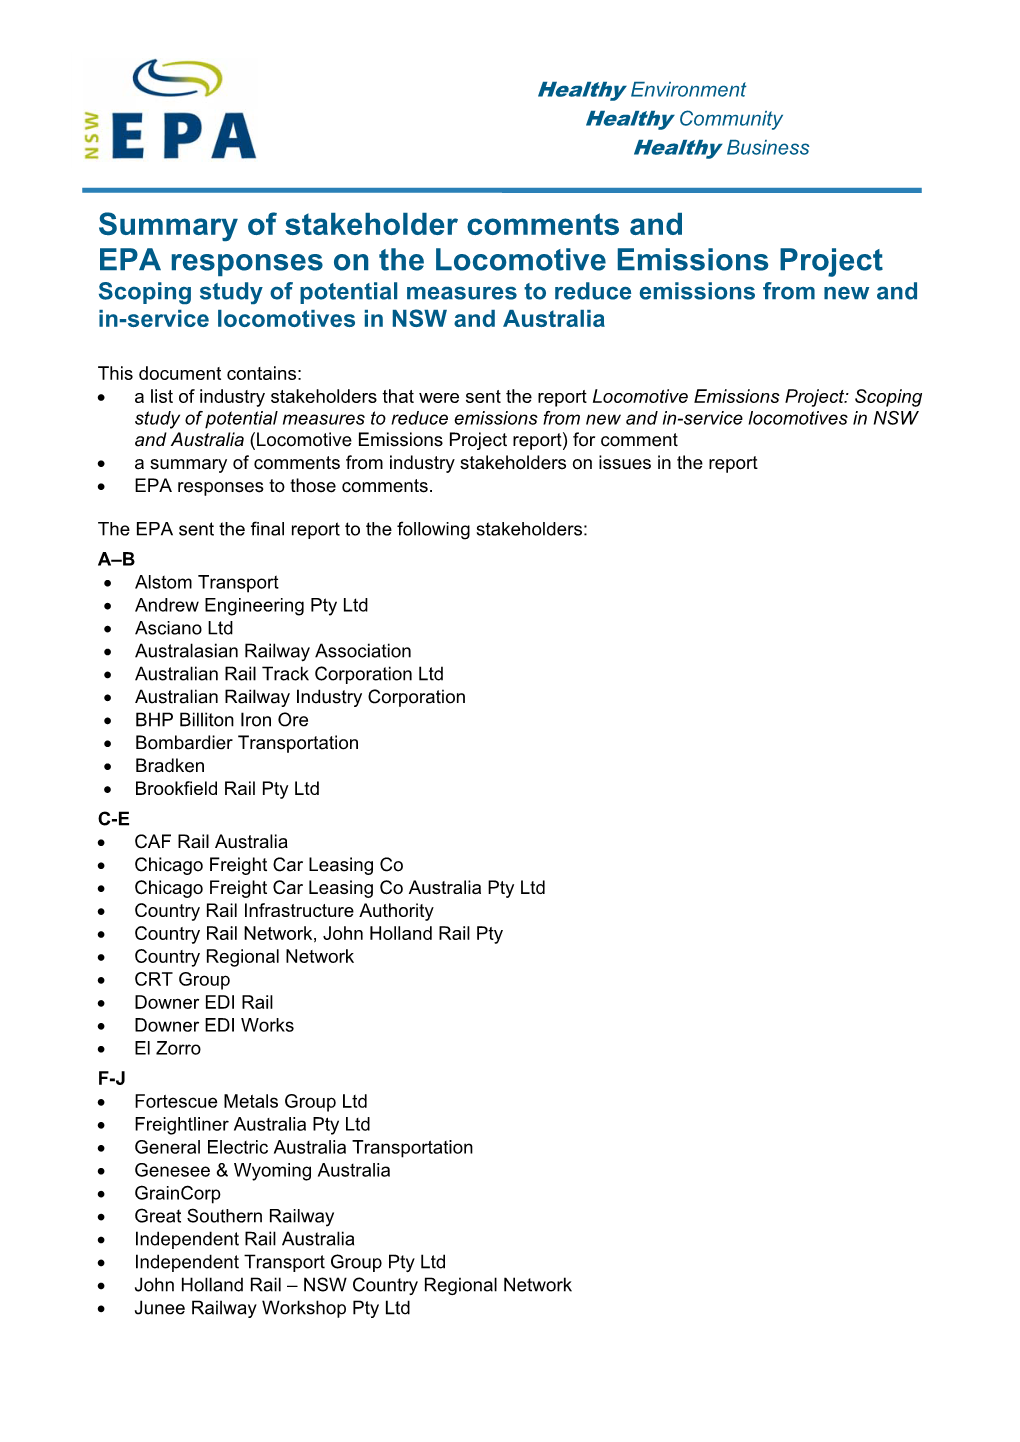 Summary of Stakeholder Comments and EPA Responses on The